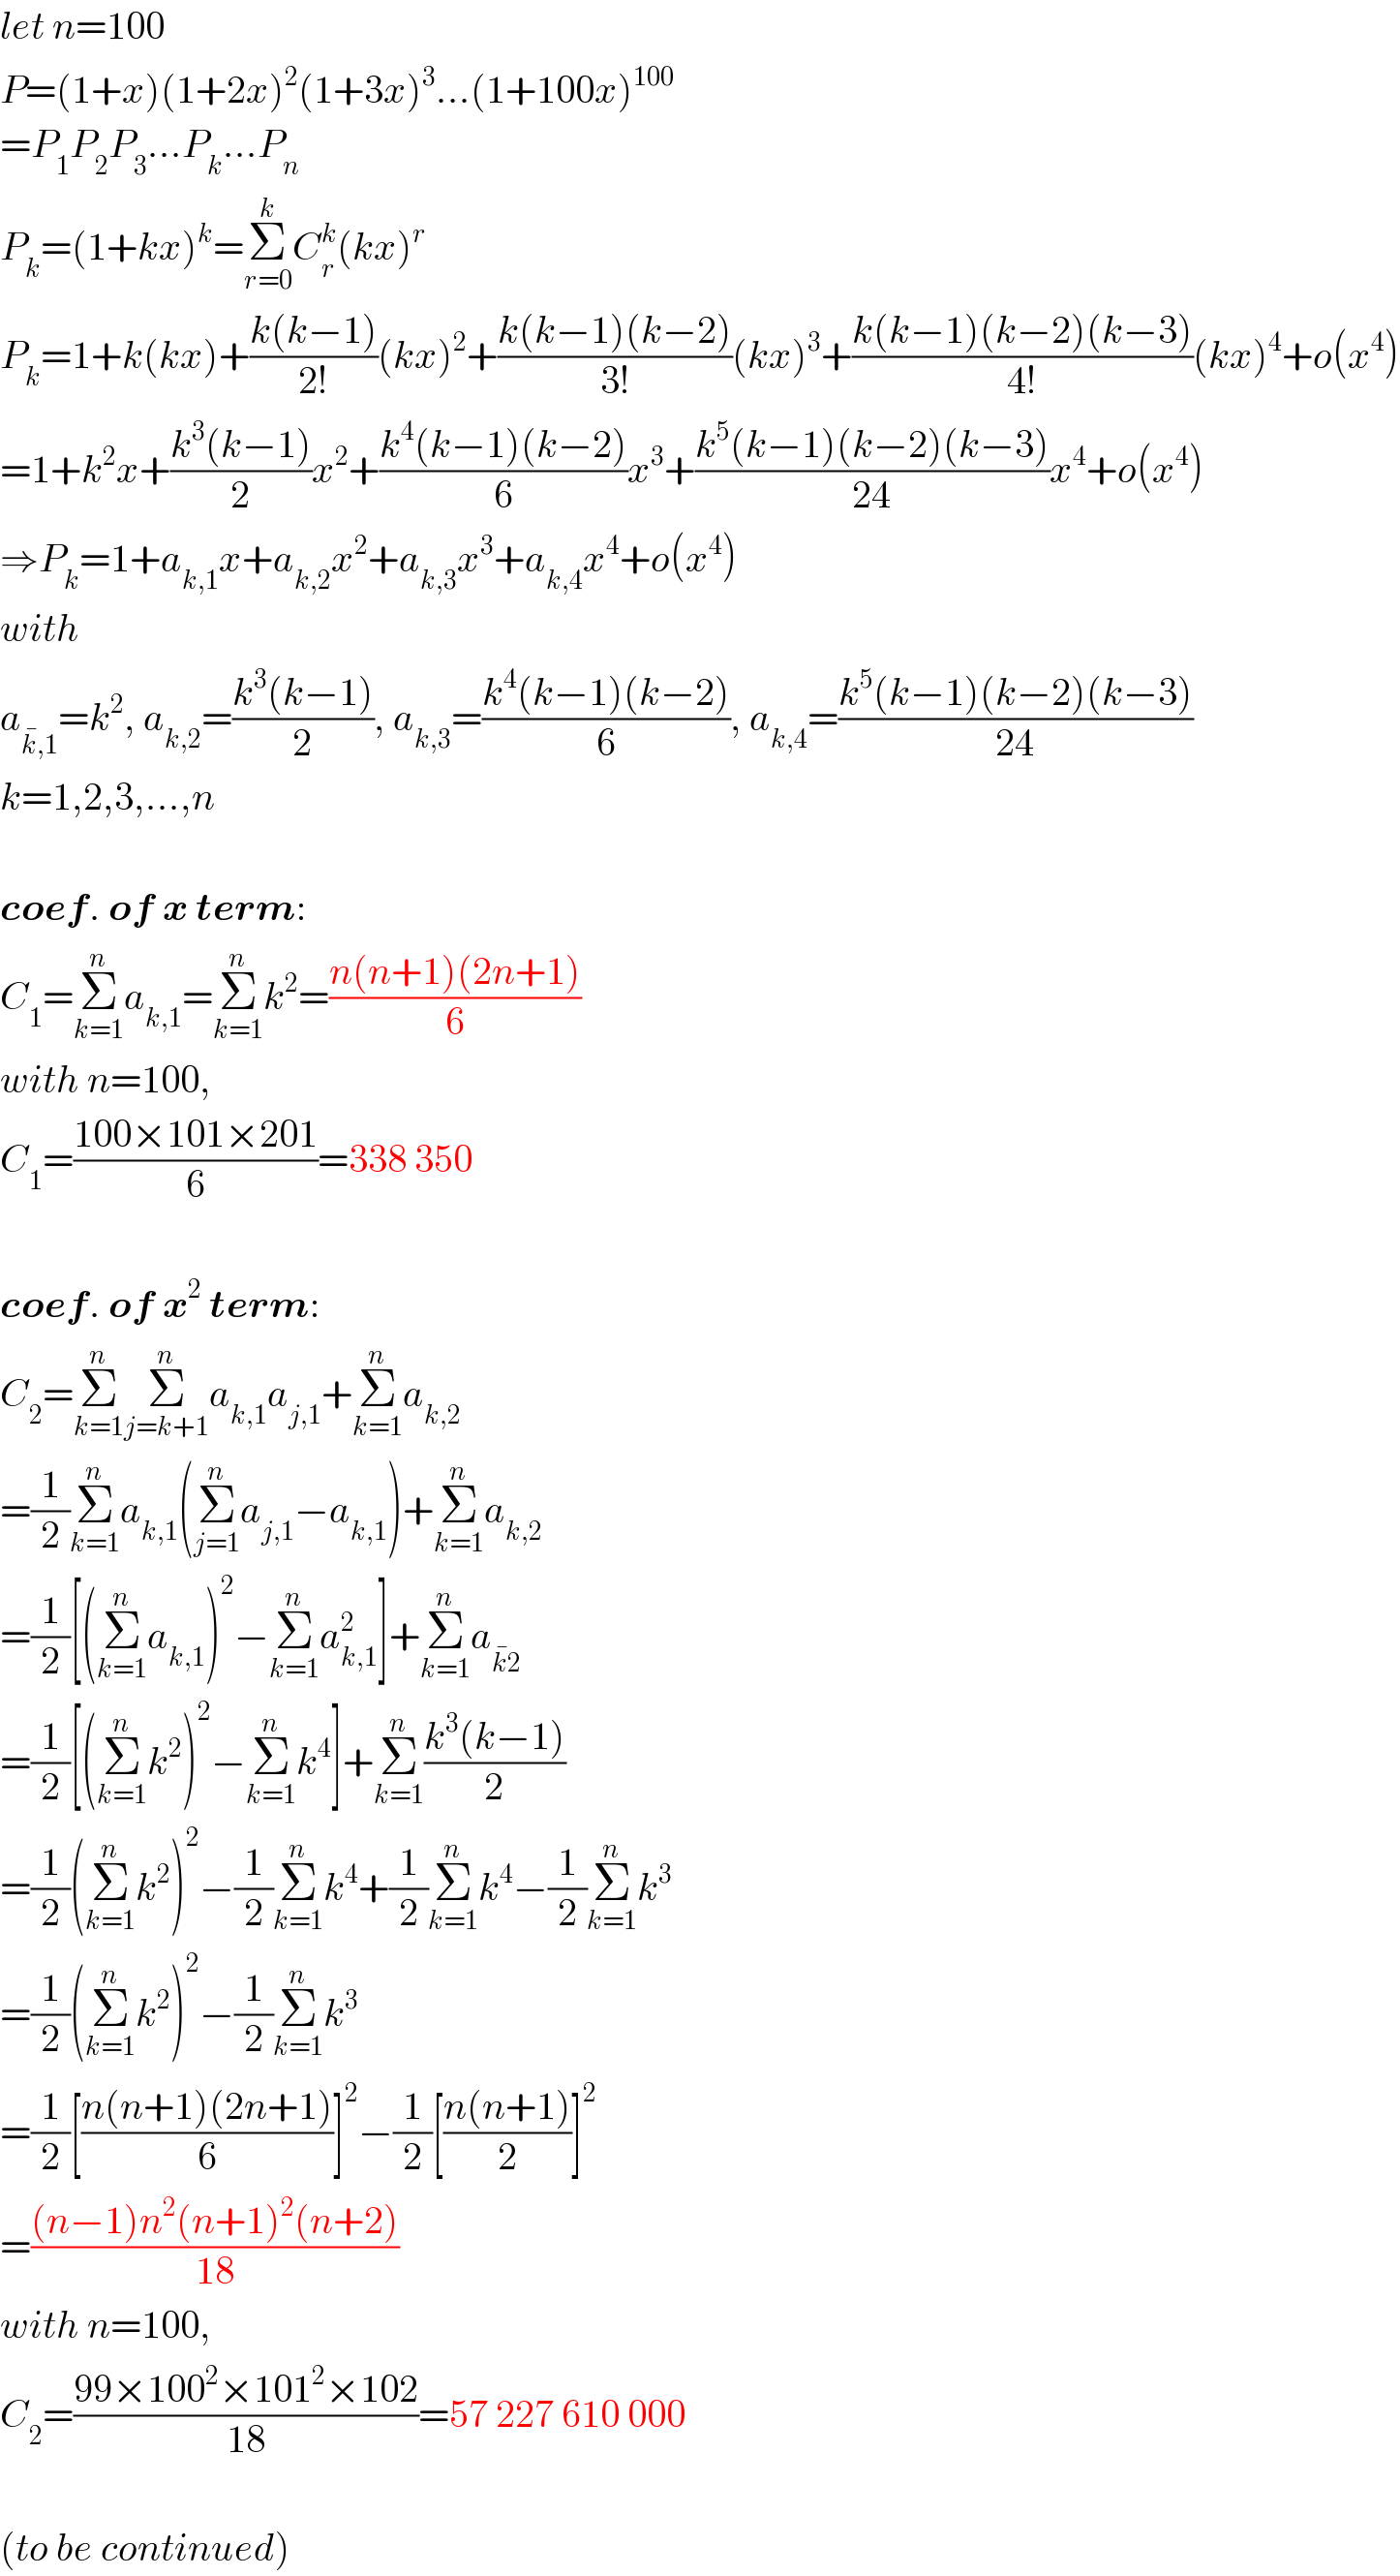 let n=100  P=(1+x)(1+2x)^2 (1+3x)^3 ...(1+100x)^(100)   =P_1 P_2 P_3 ...P_k ...P_n   P_k =(1+kx)^k =Σ_(r=0) ^k C_r ^k (kx)^r   P_k =1+k(kx)+((k(k−1))/(2!))(kx)^2 +((k(k−1)(k−2))/(3!))(kx)^3 +((k(k−1)(k−2)(k−3))/(4!))(kx)^4 +o(x^4 )  =1+k^2 x+((k^3 (k−1))/2)x^2 +((k^4 (k−1)(k−2))/6)x^3 +((k^5 (k−1)(k−2)(k−3))/(24))x^4 +o(x^4 )  ⇒P_k =1+a_(k,1) x+a_(k,2) x^2 +a_(k,3) x^3 +a_(k,4) x^4 +o(x^4 )  with   a_(k^� ,1) =k^2 , a_(k,2) =((k^3 (k−1))/2), a_(k,3) =((k^4 (k−1)(k−2))/6), a_(k,4) =((k^5 (k−1)(k−2)(k−3))/(24))  k=1,2,3,...,n    coef. of x term:  C_1 =Σ_(k=1) ^n a_(k,1) =Σ_(k=1) ^n k^2 =((n(n+1)(2n+1))/6)  with n=100,  C_1 =((100×101×201)/6)=338 350    coef. of x^2  term:  C_2 =Σ_(k=1) ^n Σ_(j=k+1) ^n a_(k,1) a_(j,1) +Σ_(k=1) ^n a_(k,2)   =(1/2)Σ_(k=1) ^n a_(k,1) (Σ_(j=1) ^n a_(j,1) −a_(k,1) )+Σ_(k=1) ^n a_(k,2)   =(1/2)[(Σ_(k=1) ^n a_(k,1) )^2 −Σ_(k=1) ^n a_(k,1) ^2 ]+Σ_(k=1) ^n a_(k^� 2)   =(1/2)[(Σ_(k=1) ^n k^2 )^2 −Σ_(k=1) ^n k^4 ]+Σ_(k=1) ^n ((k^3 (k−1))/2)  =(1/2)(Σ_(k=1) ^n k^2 )^2 −(1/2)Σ_(k=1) ^n k^4 +(1/2)Σ_(k=1) ^n k^4 −(1/2)Σ_(k=1) ^n k^3   =(1/2)(Σ_(k=1) ^n k^2 )^2 −(1/2)Σ_(k=1) ^n k^3   =(1/2)[((n(n+1)(2n+1))/6)]^2 −(1/2)[((n(n+1))/2)]^2   =(((n−1)n^2 (n+1)^2 (n+2))/(18))  with n=100,  C_2 =((99×100^2 ×101^2 ×102)/(18))=57 227 610 000    (to be continued)  